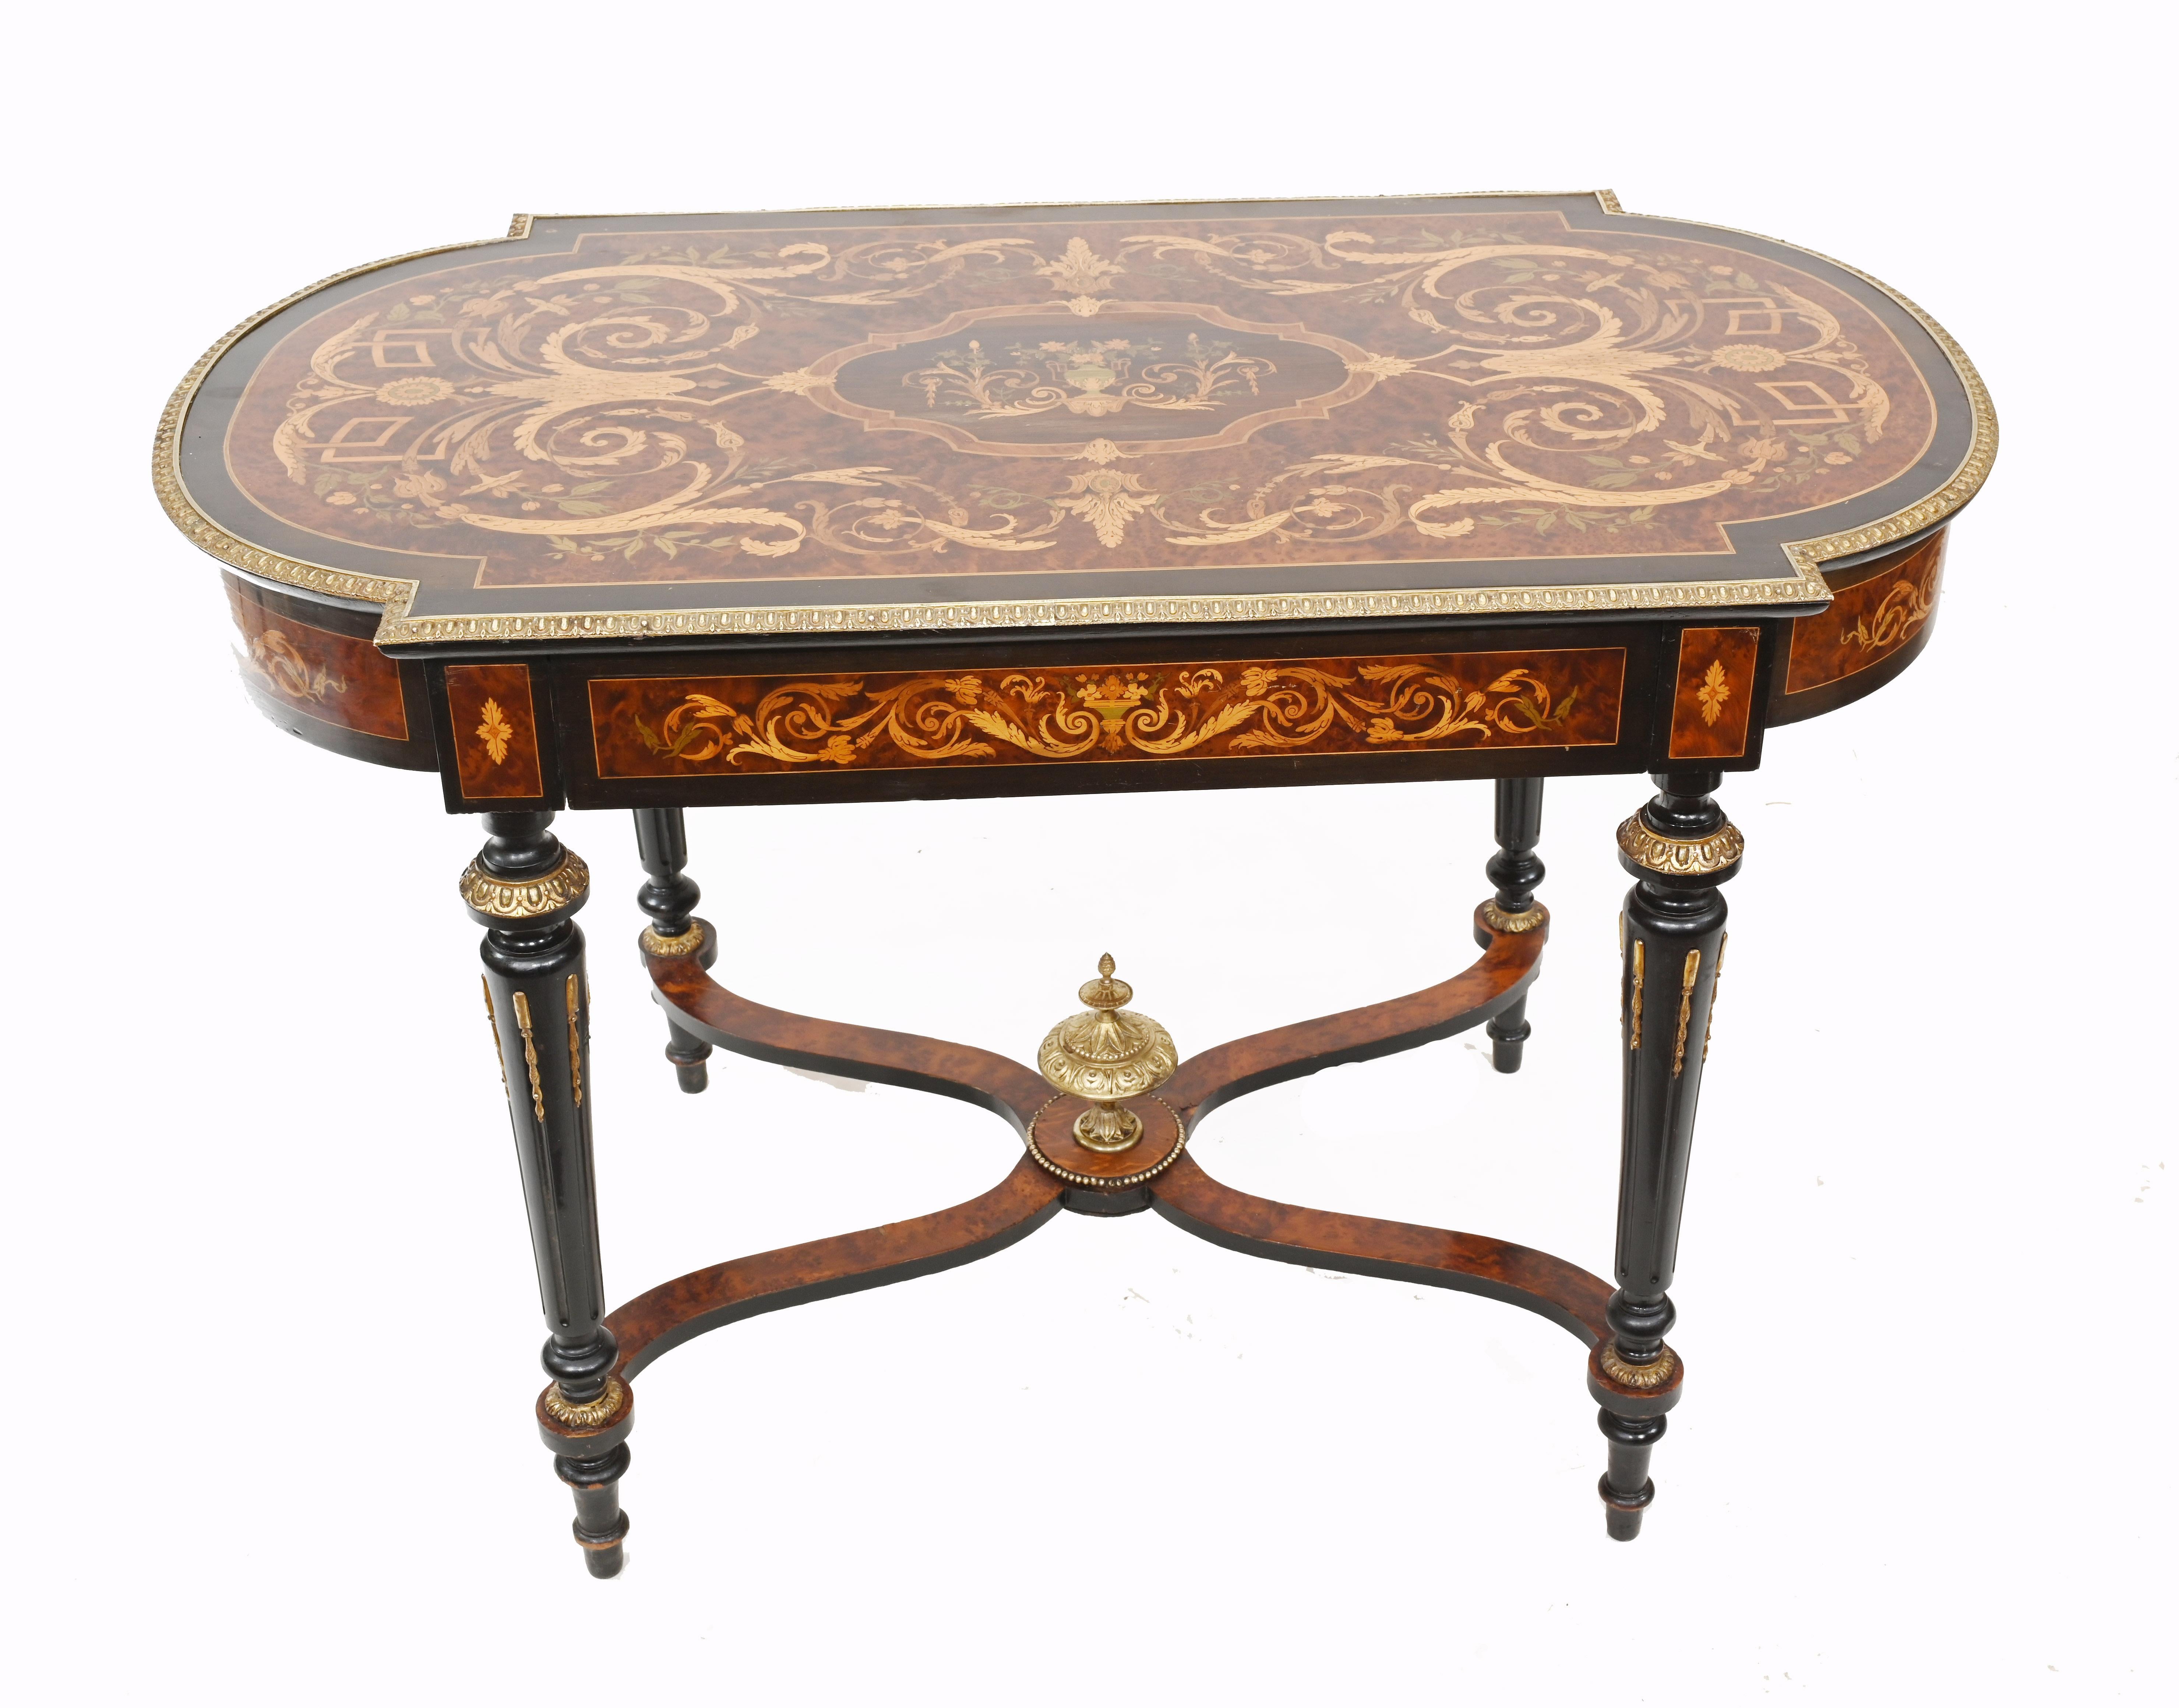 Stunning Victorian centre table with intricate marquetry inlay
We date this to circa 1880
Such a great look, the details to inlay are incredible
Brass and ormolu fixtures original to the piece
Circa 1880
Great interiors piece
Purchased from a